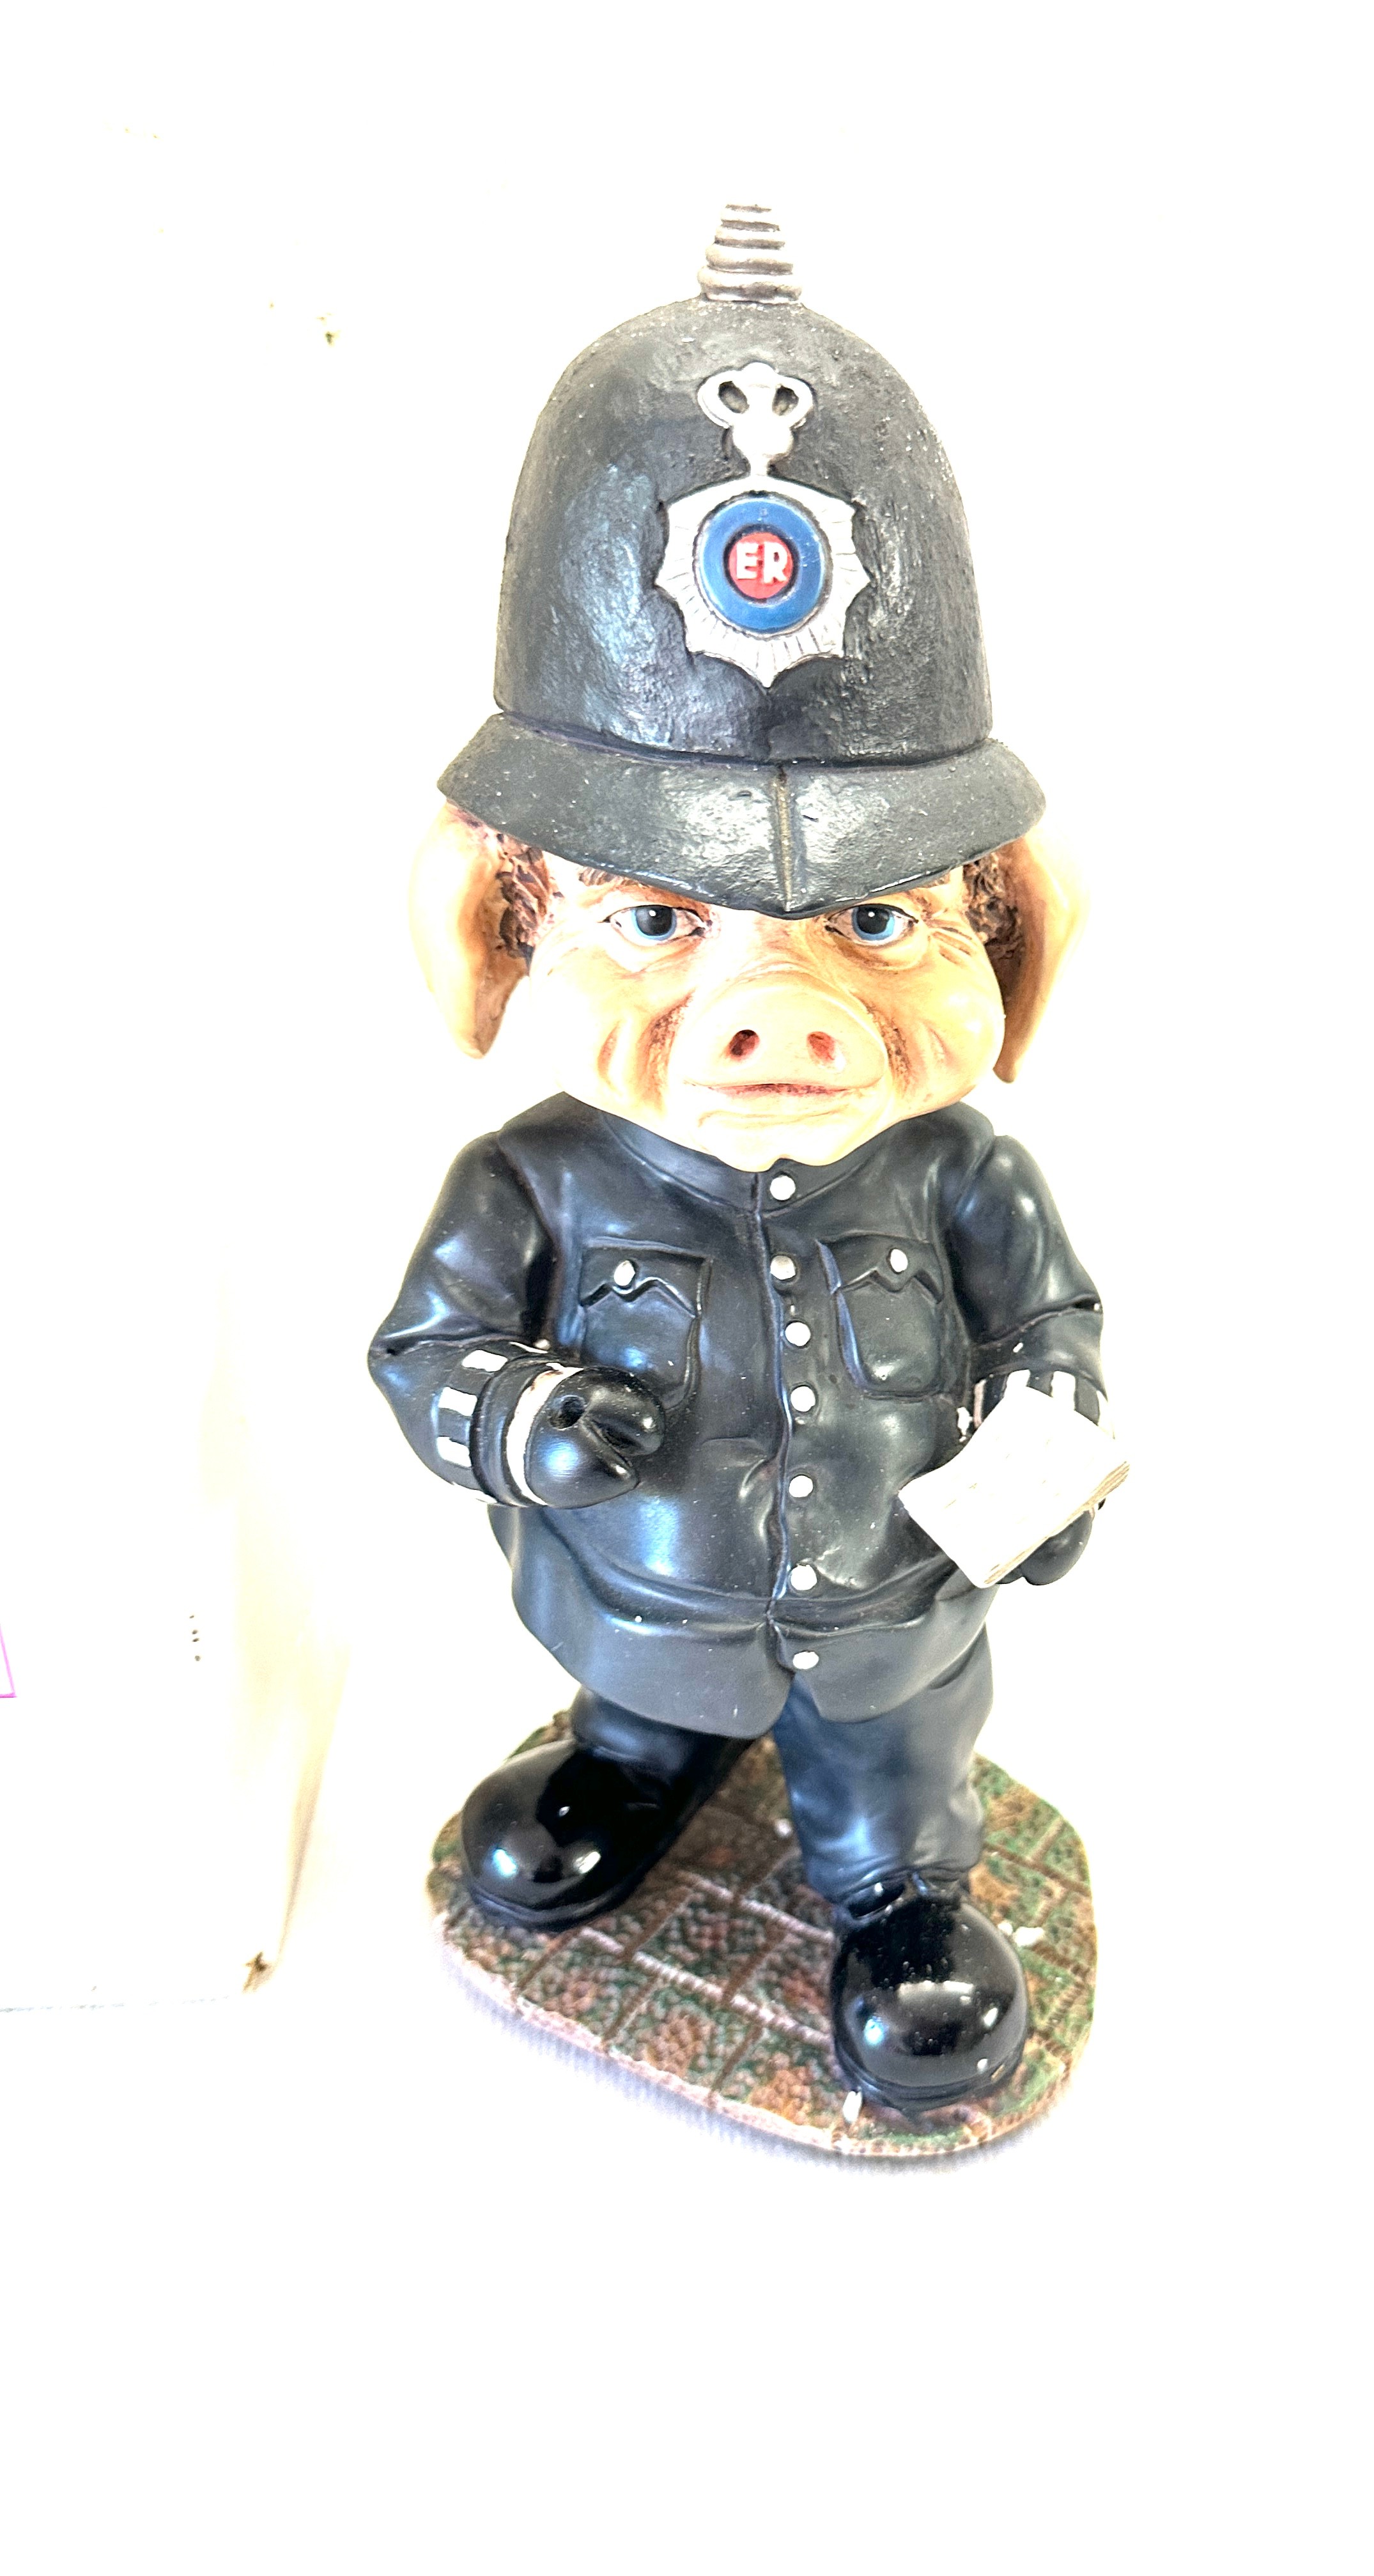 Vintage resin pig policeman figure measures approx 13 inches tall - Image 3 of 4